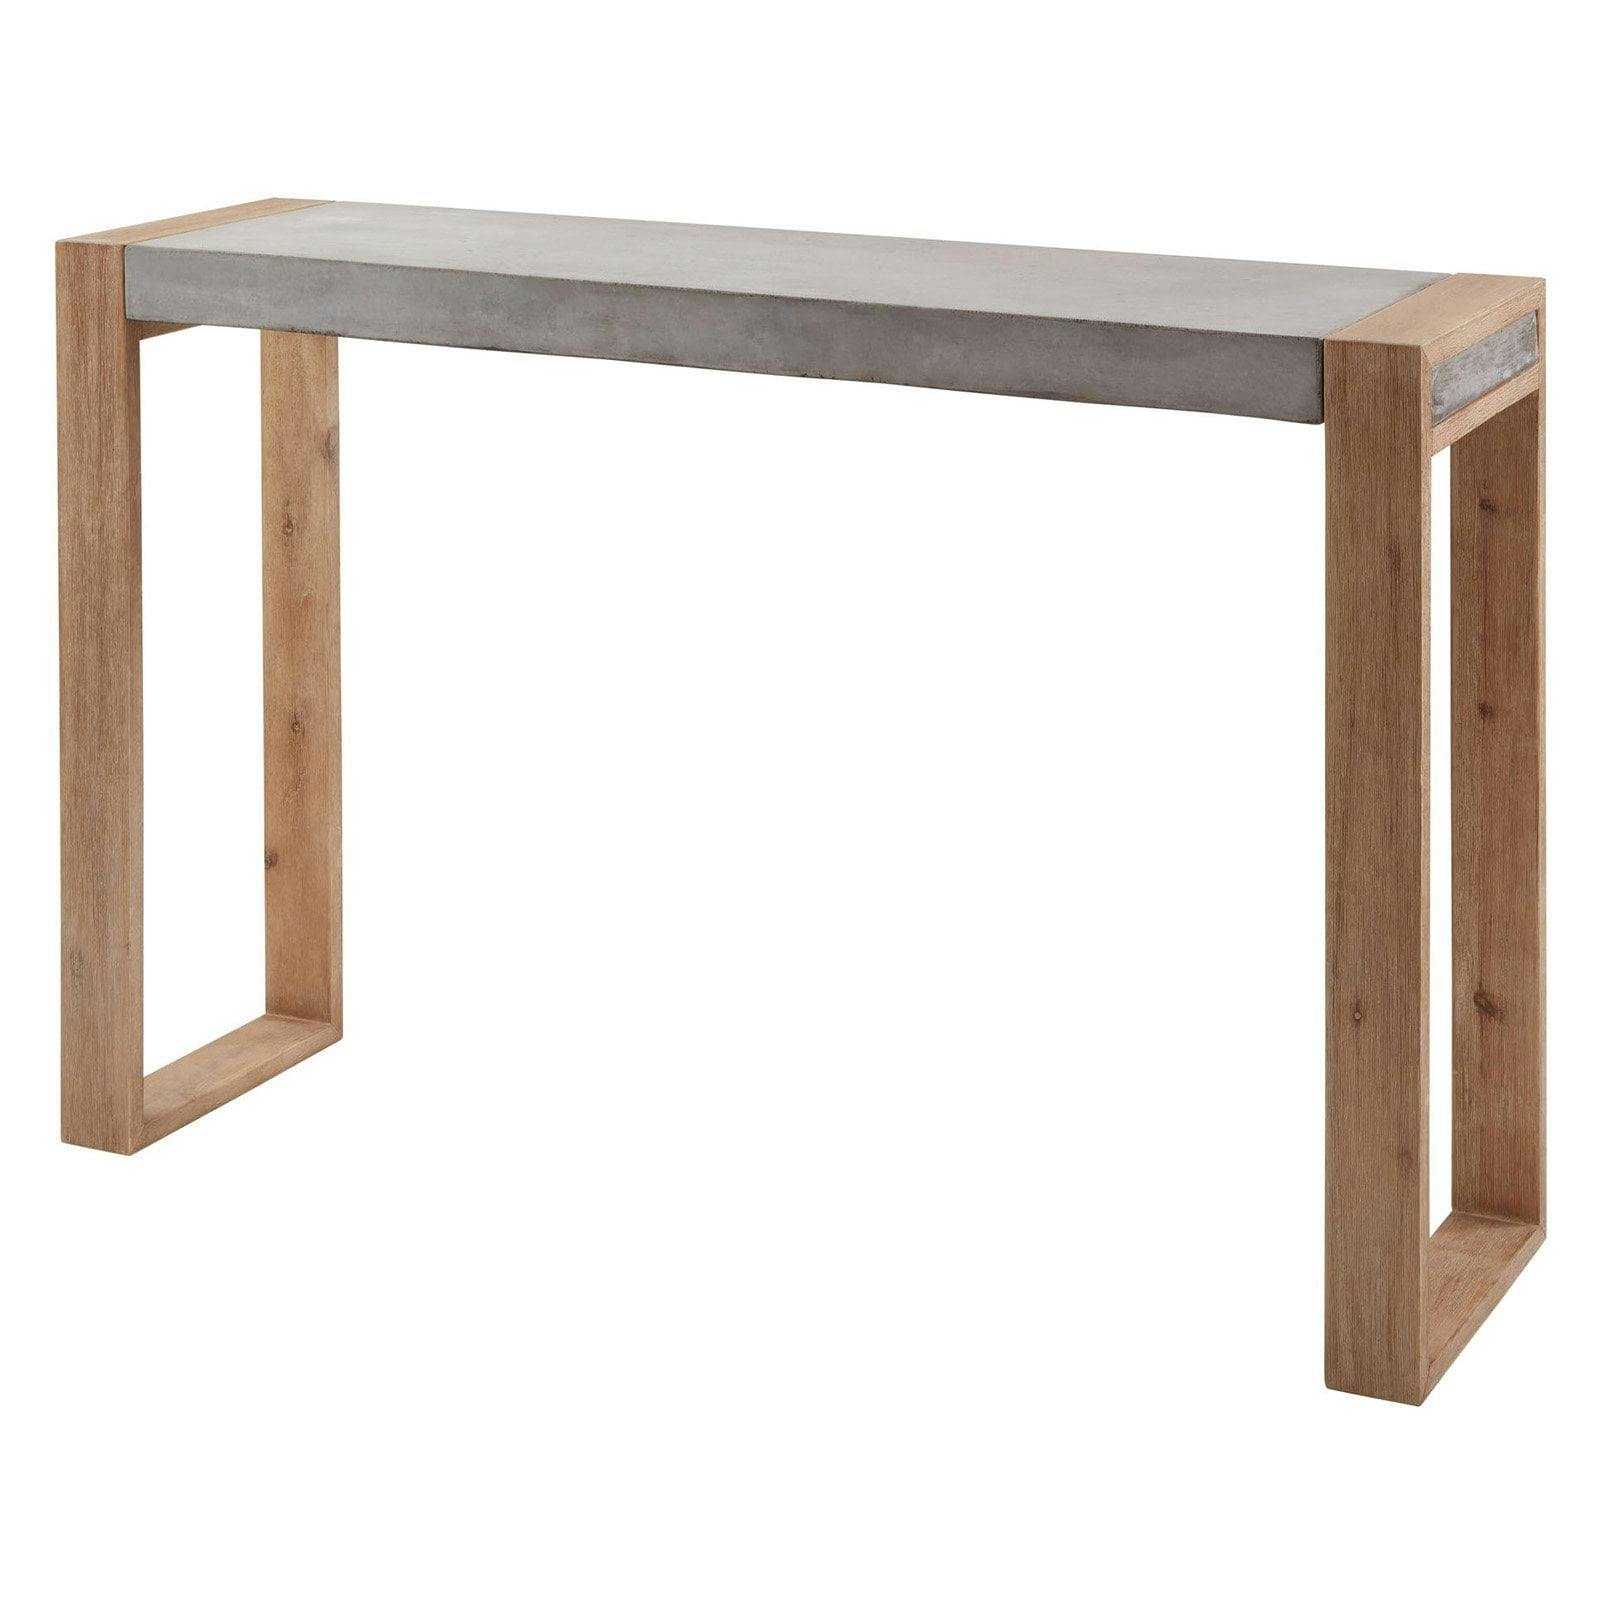 Paloma Acacia Wood and Concrete Slim Console Table - 35.5" Height